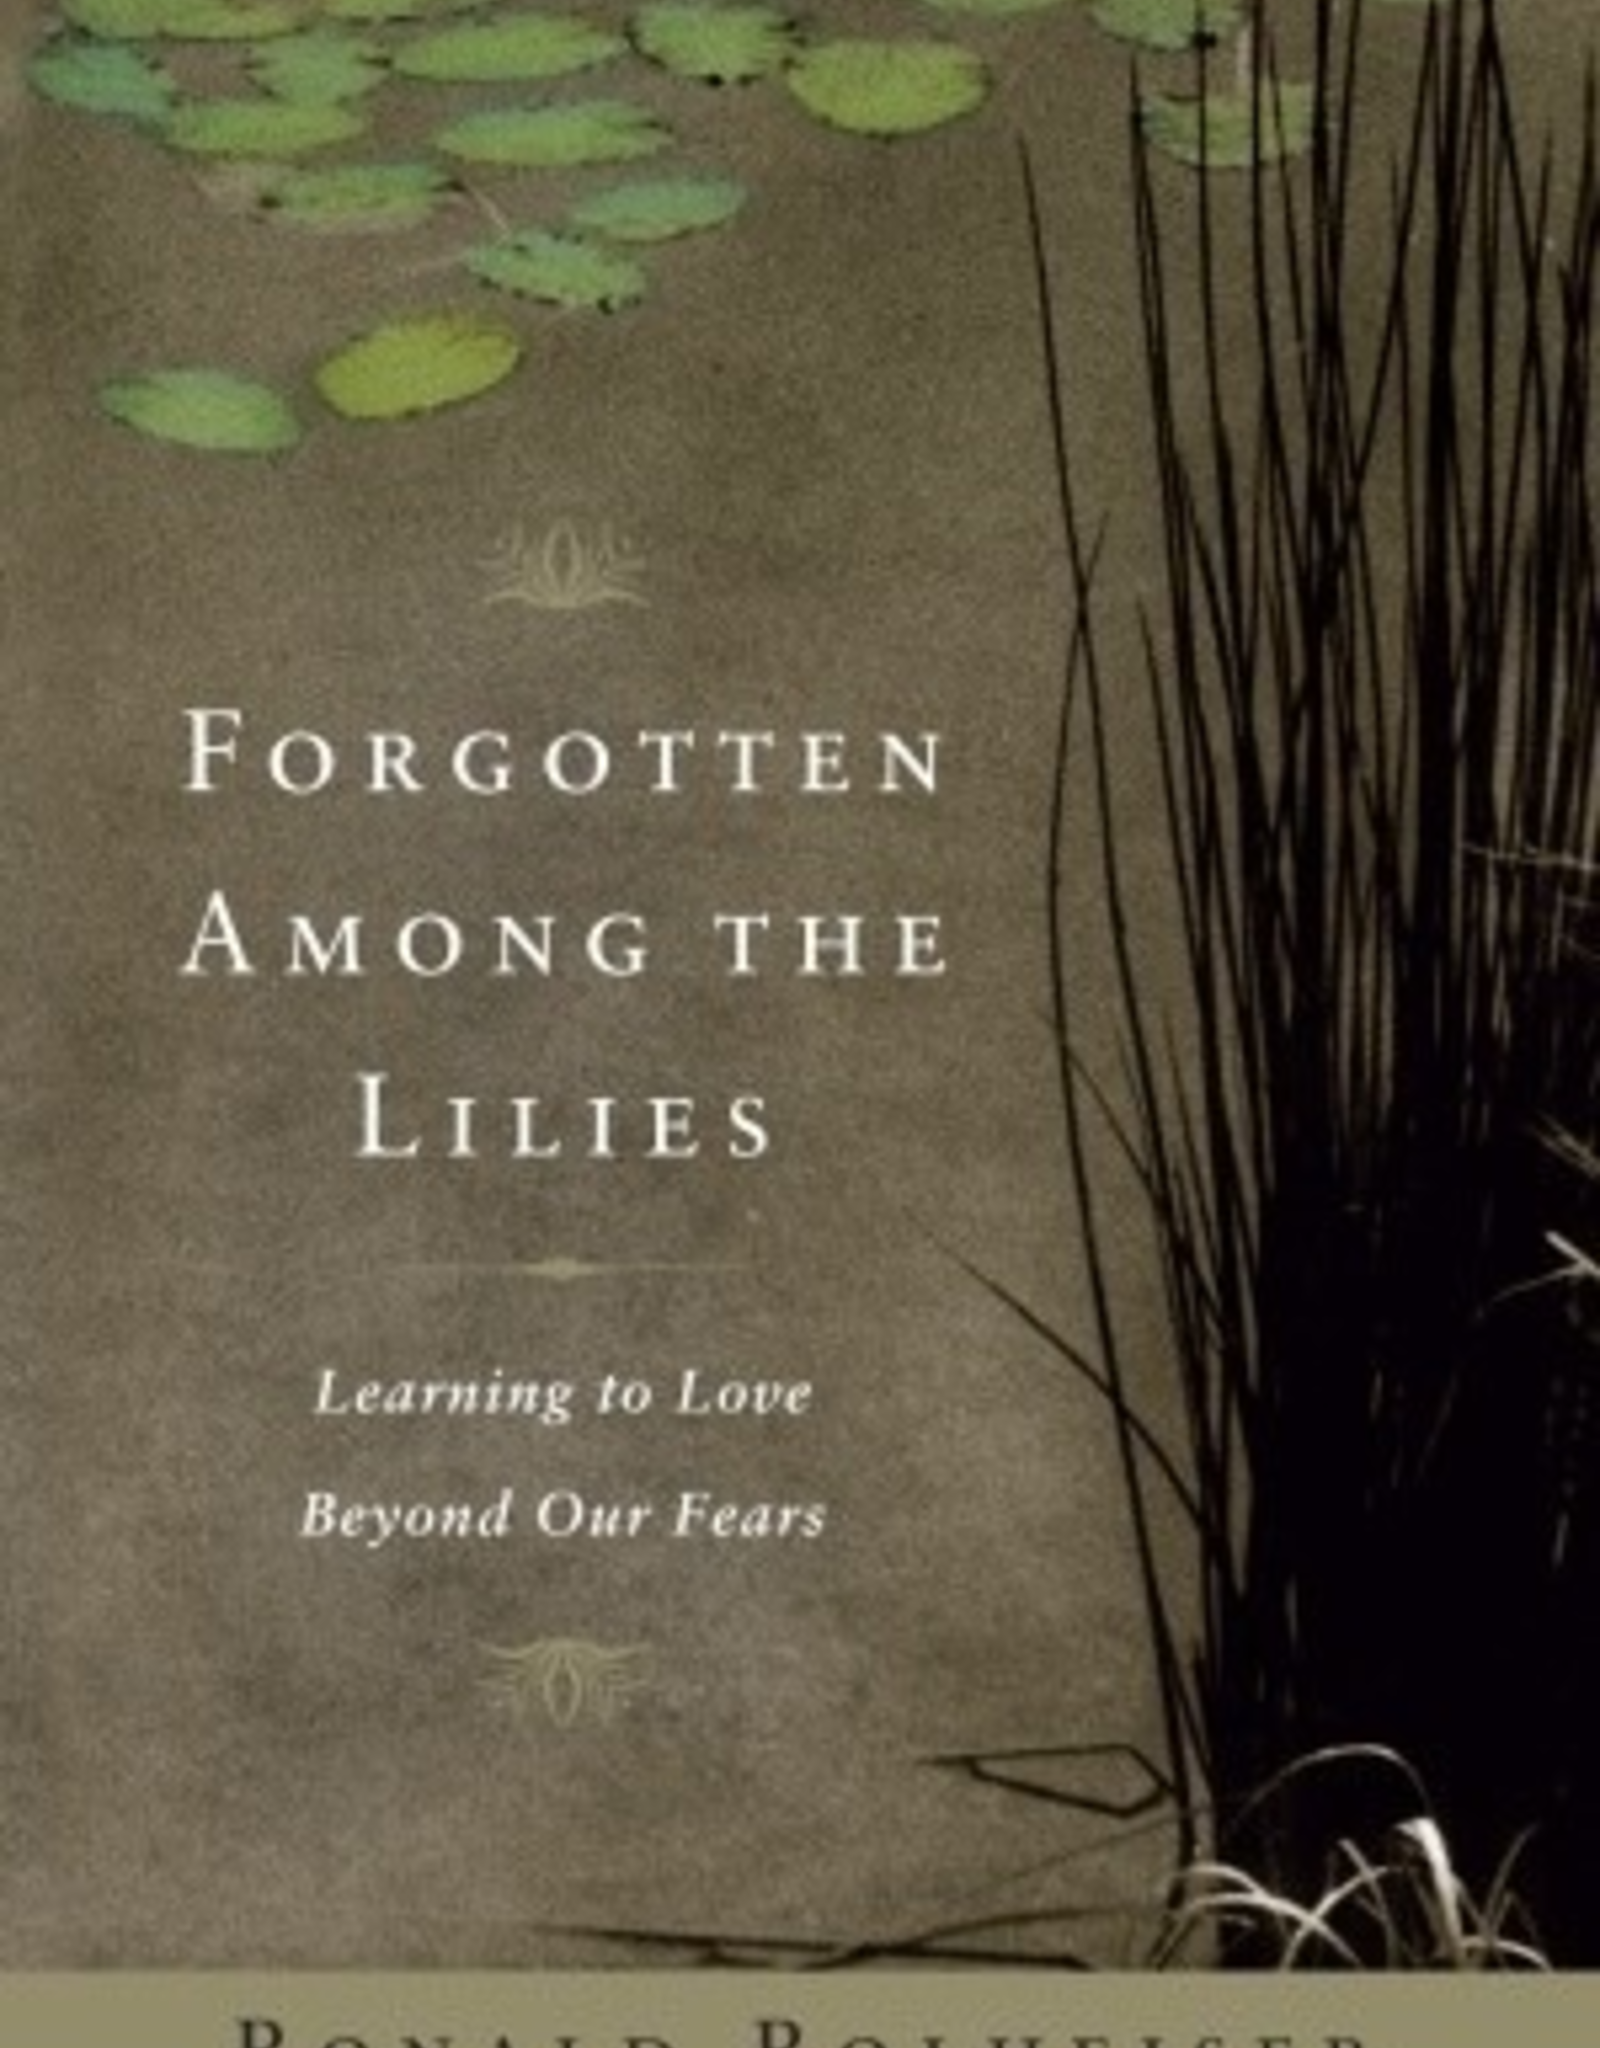 Random House Forgotten Among the Lilies:  Learning to Love Beyond Our Fears, by Ronald Rolheiser (paperback)